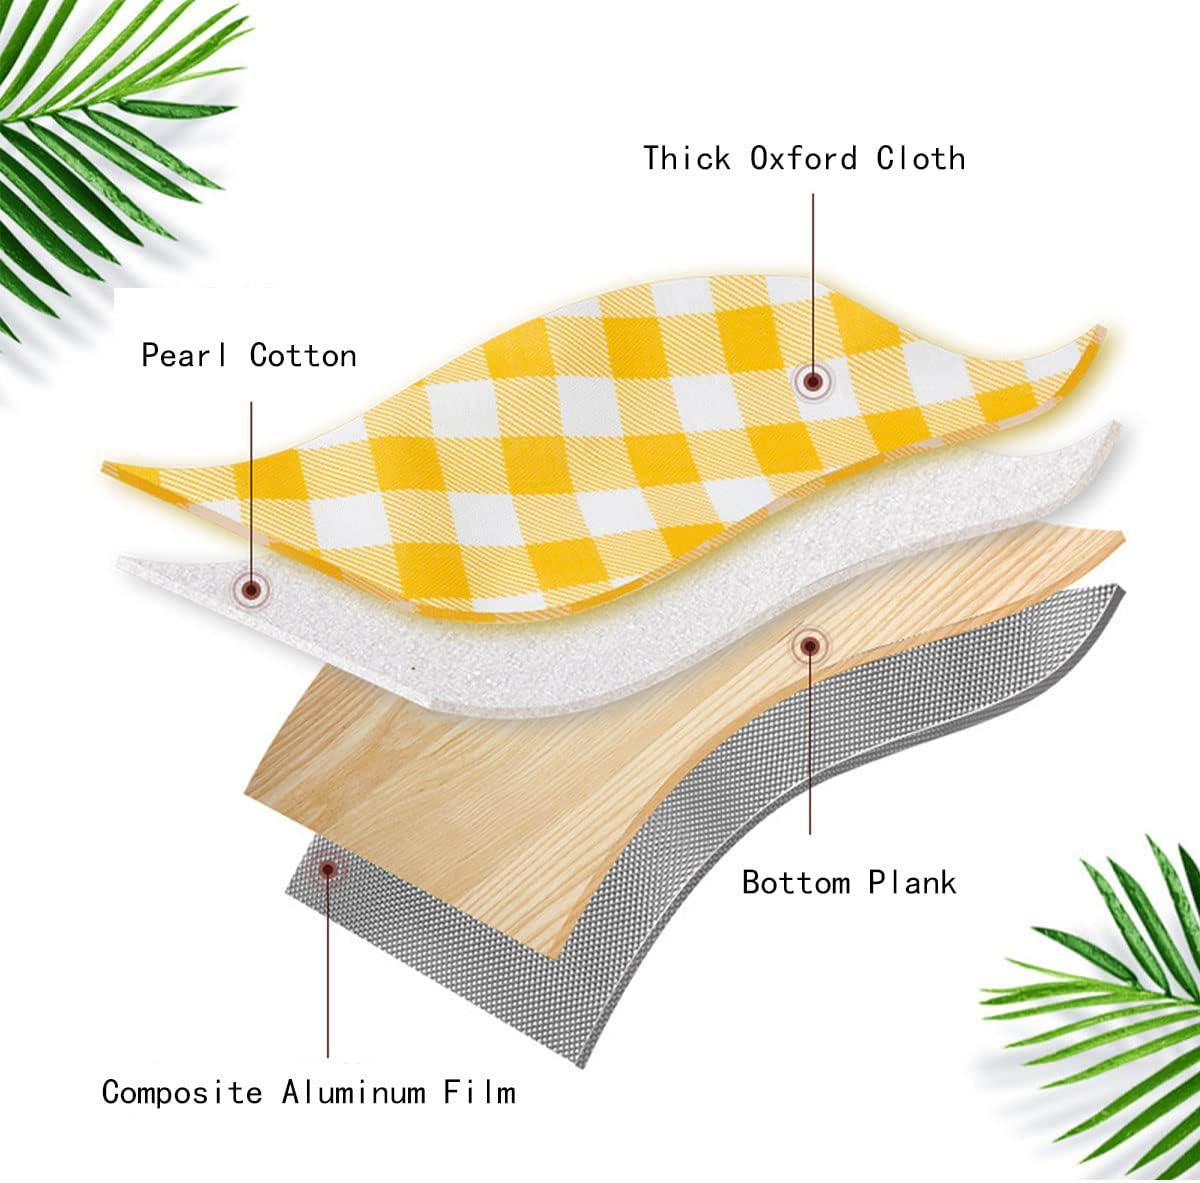 EZUNSTUCK Insulated Picnic Basket + Blanket Set for Family, 30L Large Capacity, Four Layers of Insulation, 2x2m Mat, Accommodates 4-8 People